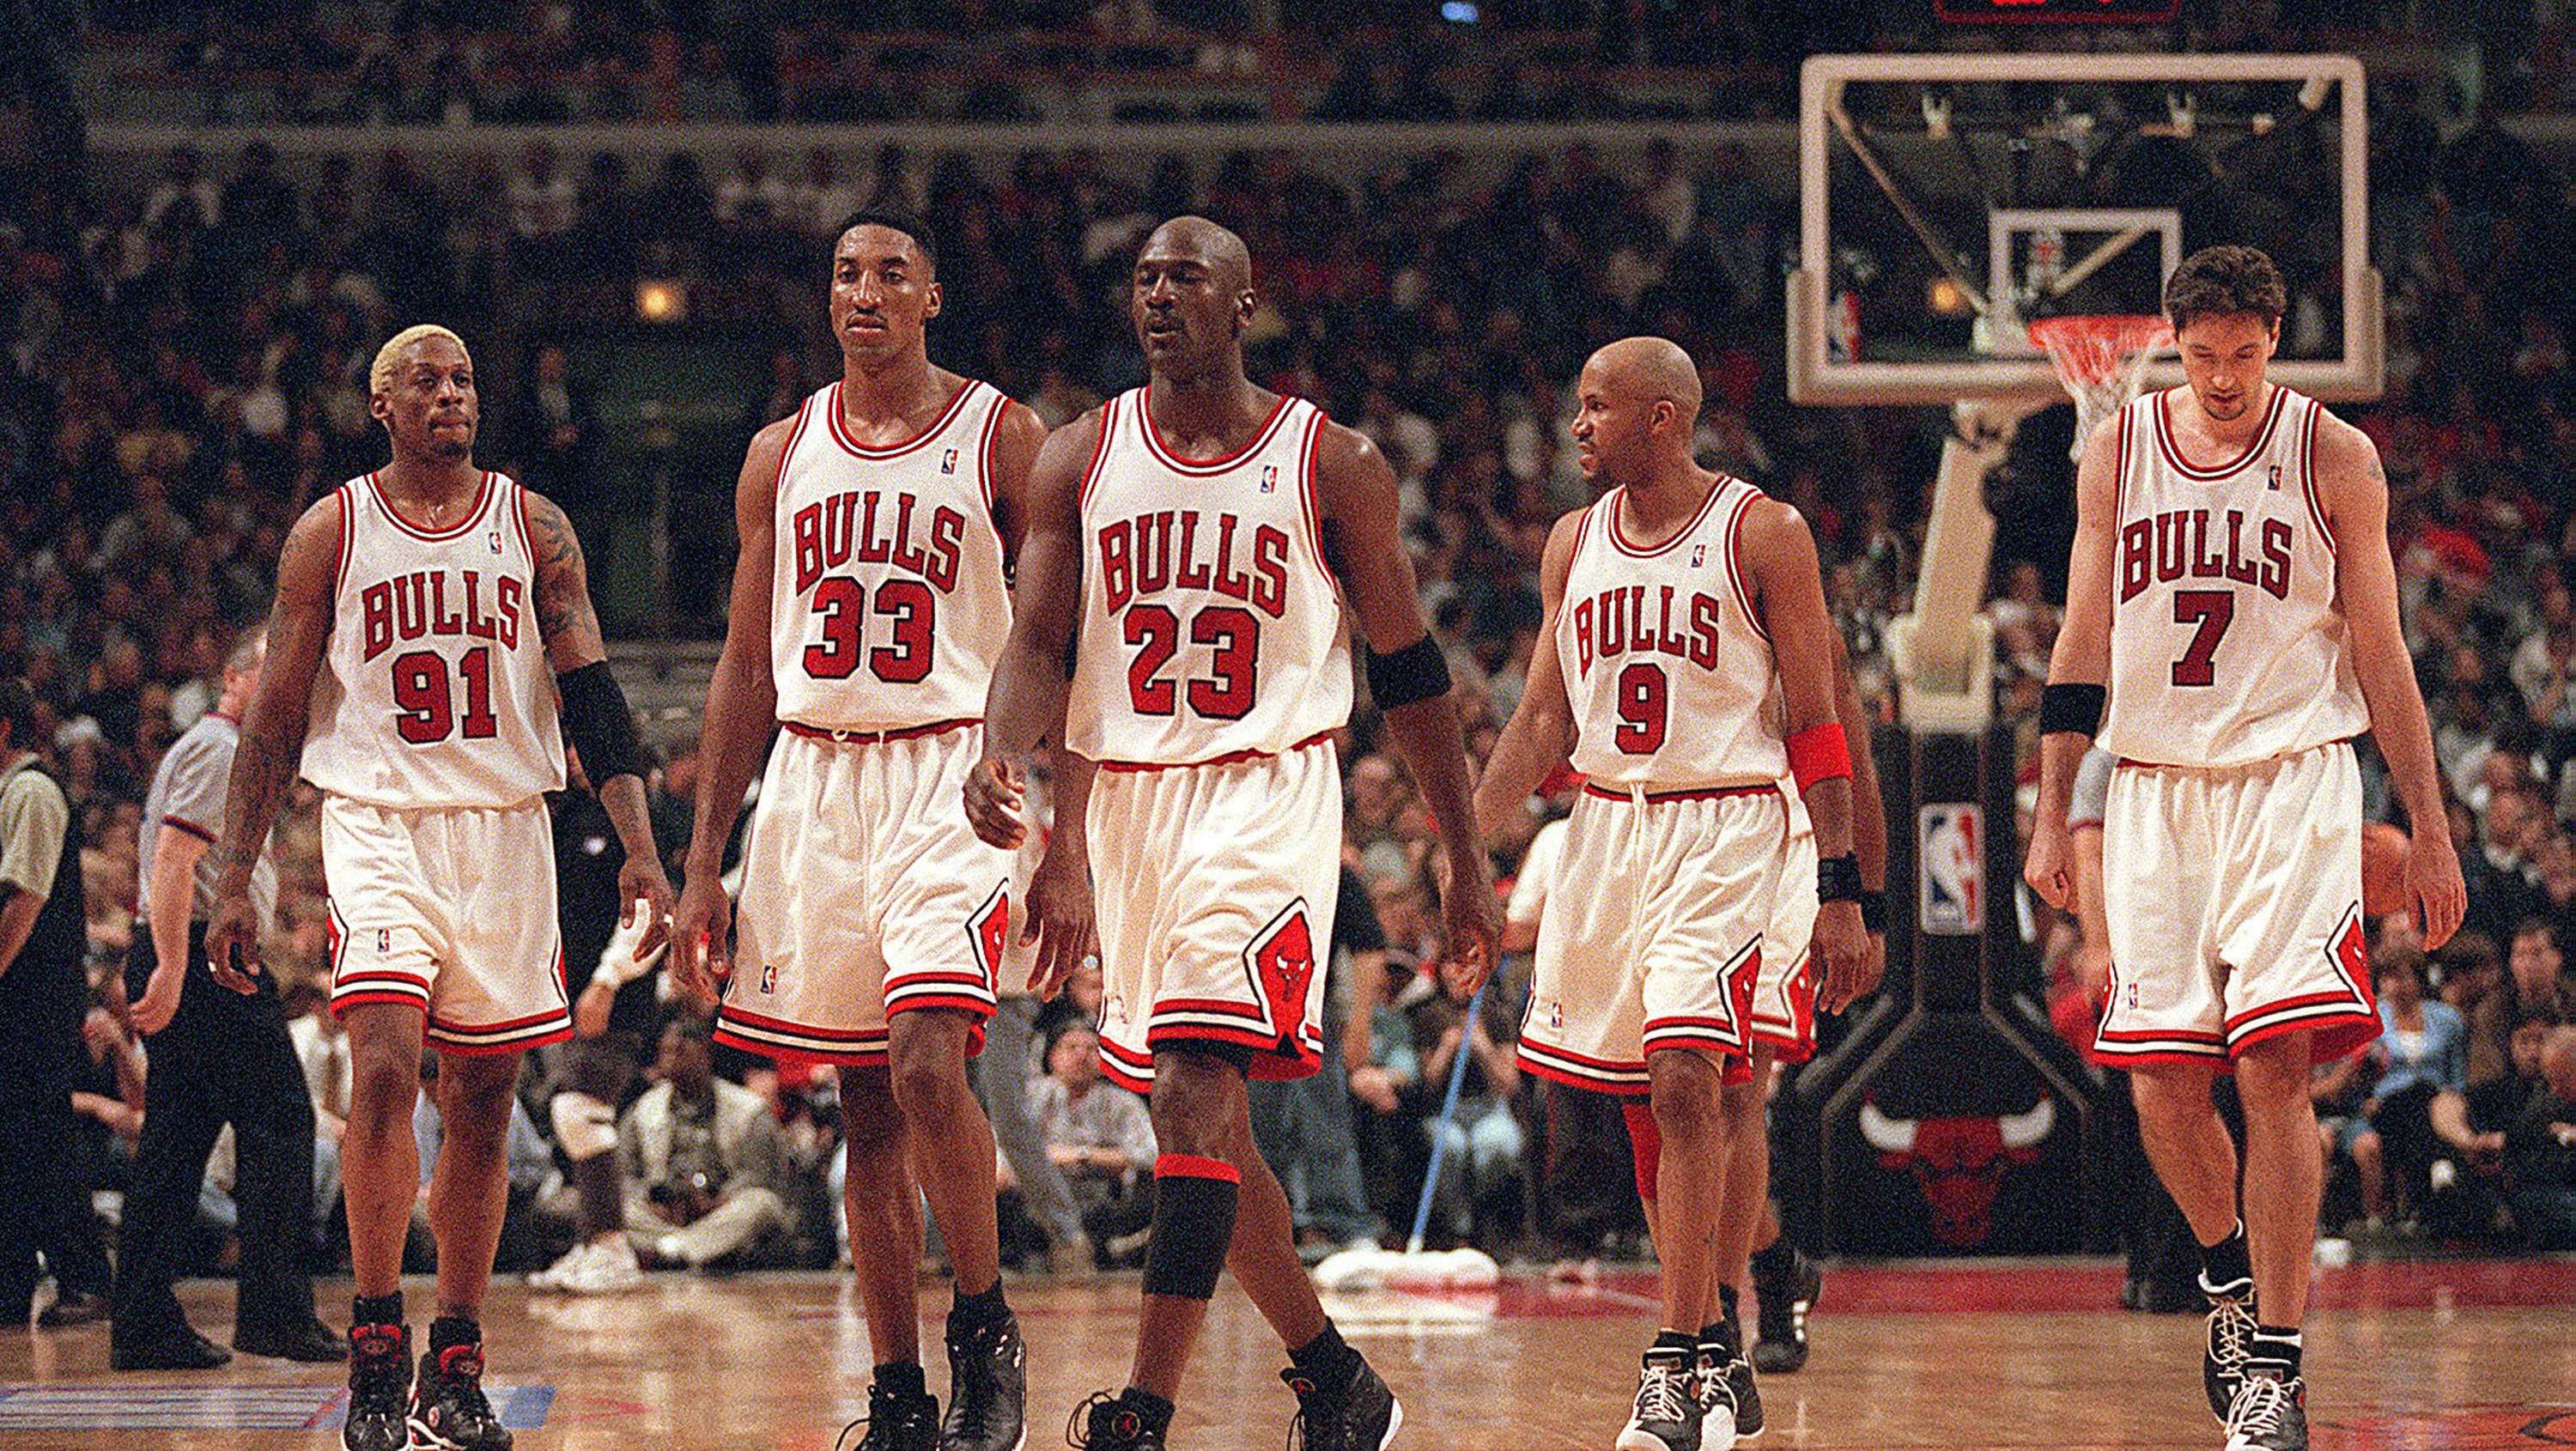 April 24, 1998 - Chicago, IL, USA - From left, Dennis Rodman, Scottie Pippen, Michael Jordan, Ron Harper and Toni Kukoc were big parts of Bulls teams that won three straight NBA Basketball Herren USA titles from 1996 to 1998. Jordan and Pippen were m